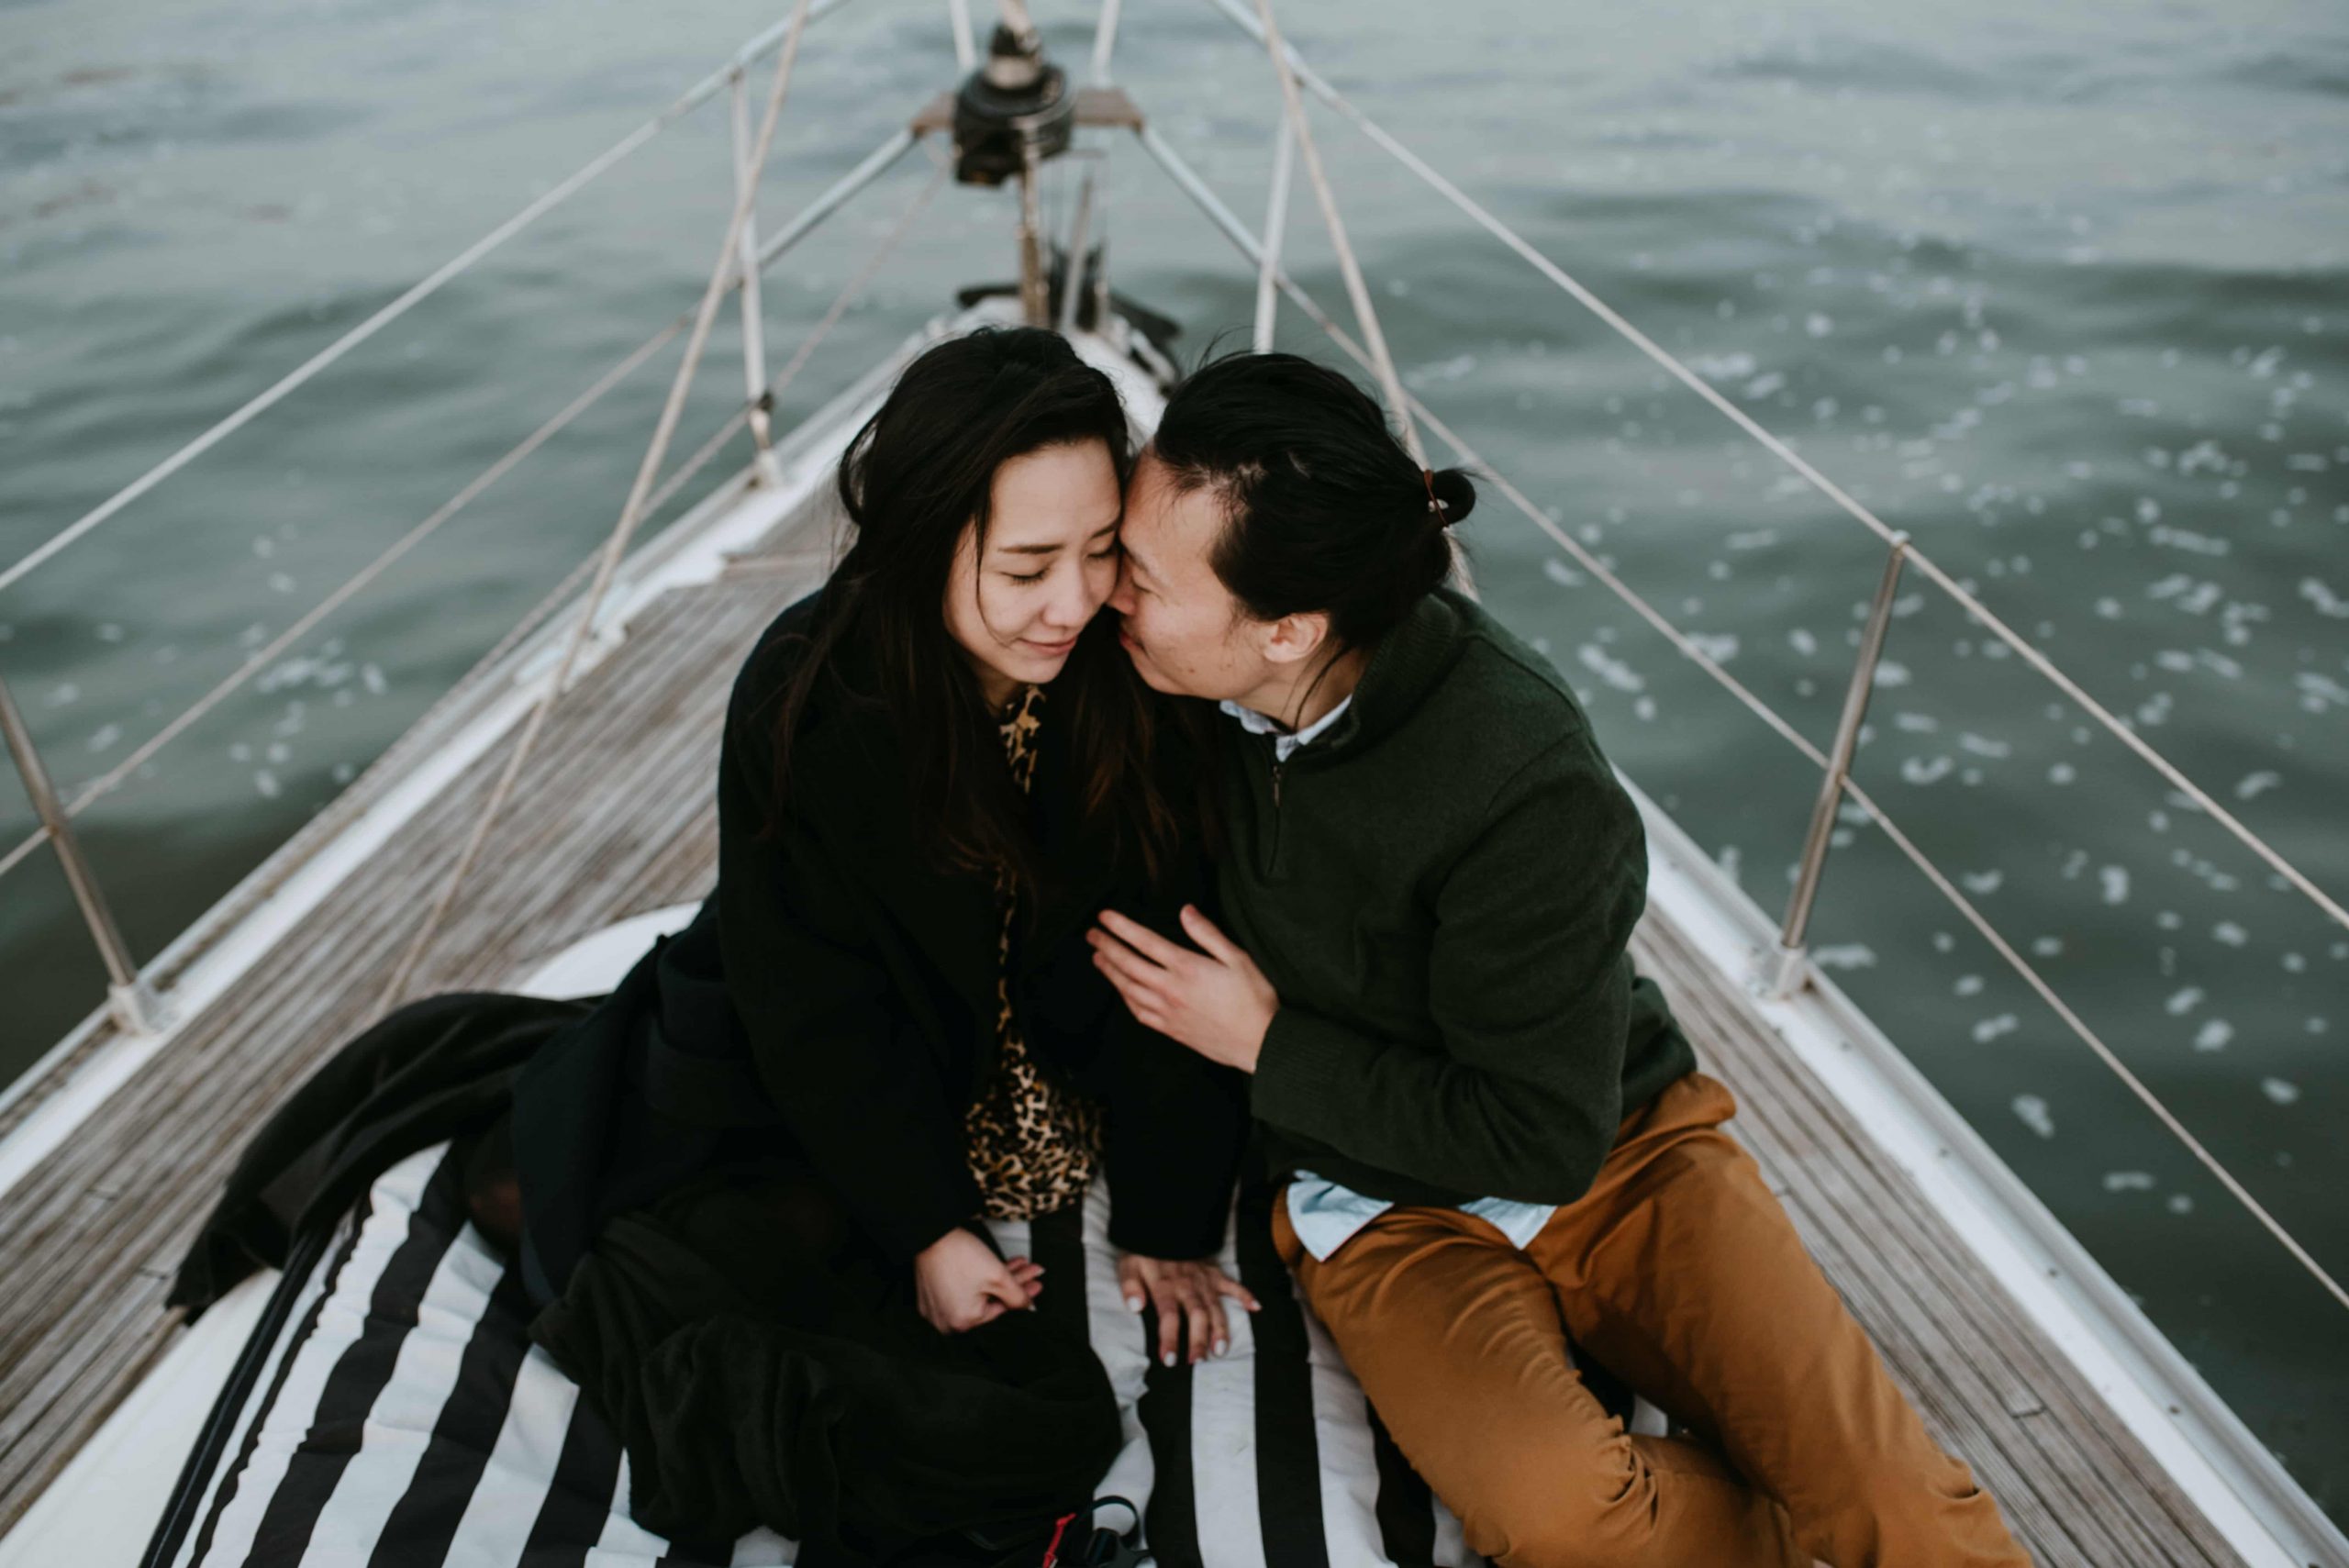 Wedding proposal on a boat in Tagus River